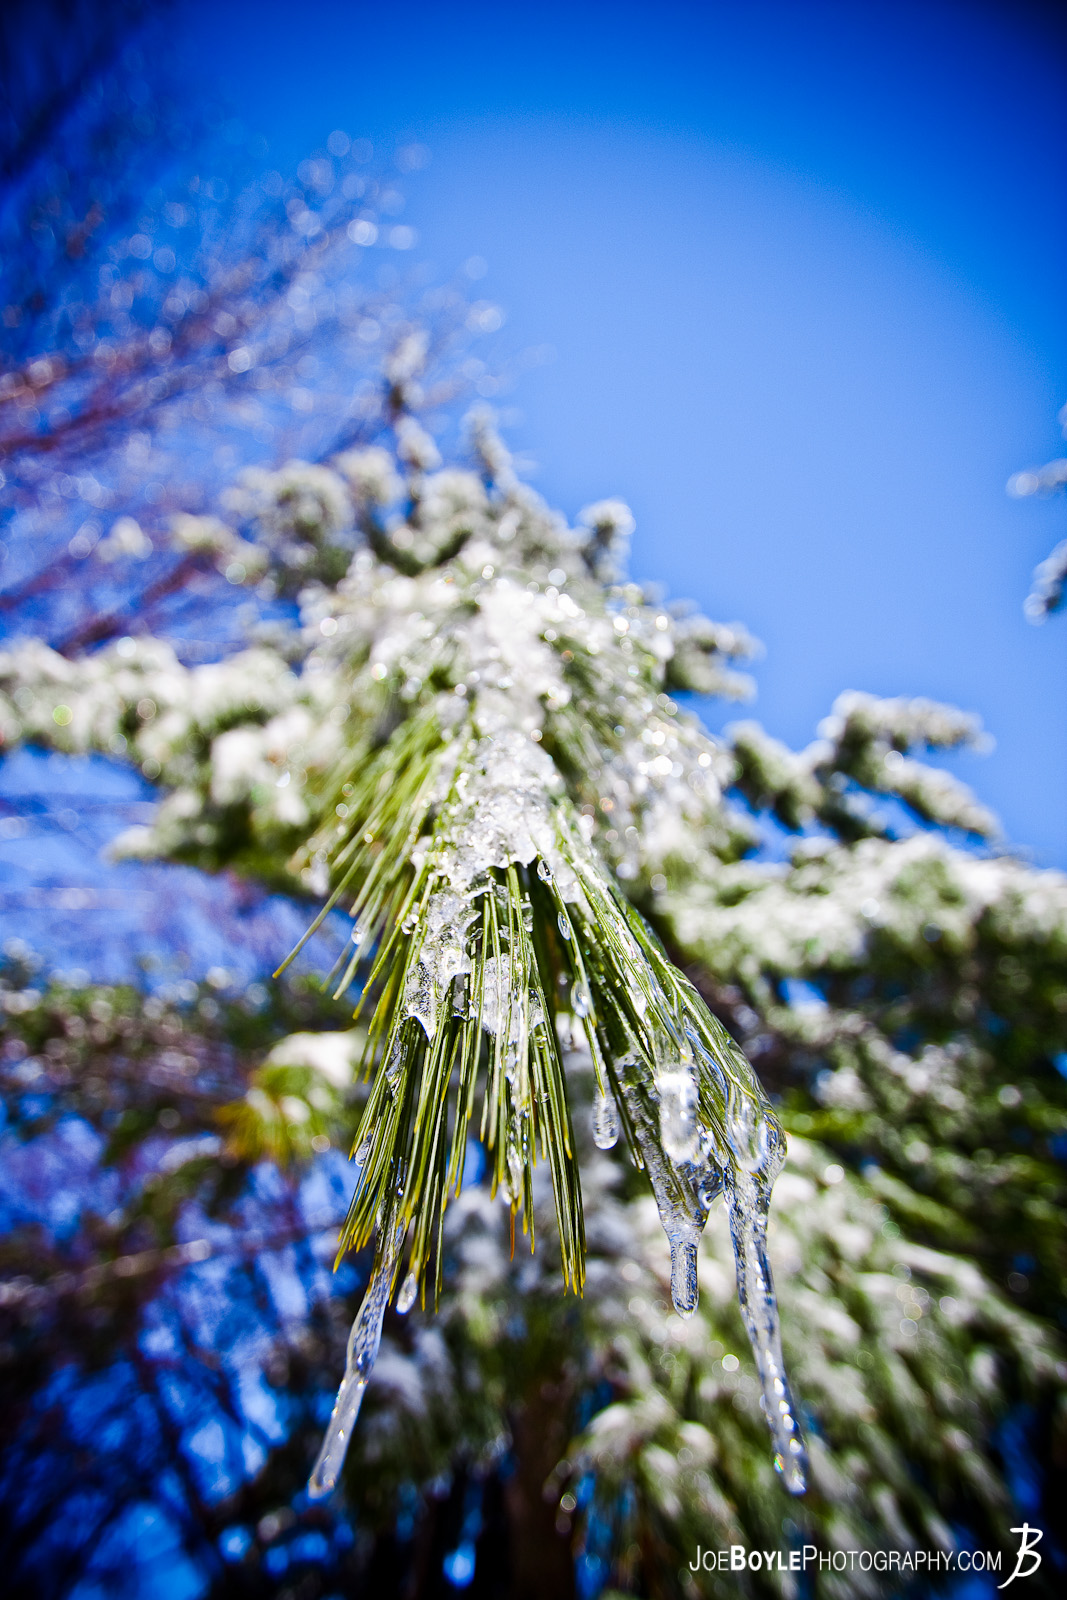  I captured this photo after an ice storm came through the Cleveland area. The storm provided some great picture opportunities that I was able to capture the following day including this evergreen tree coated in ice! 